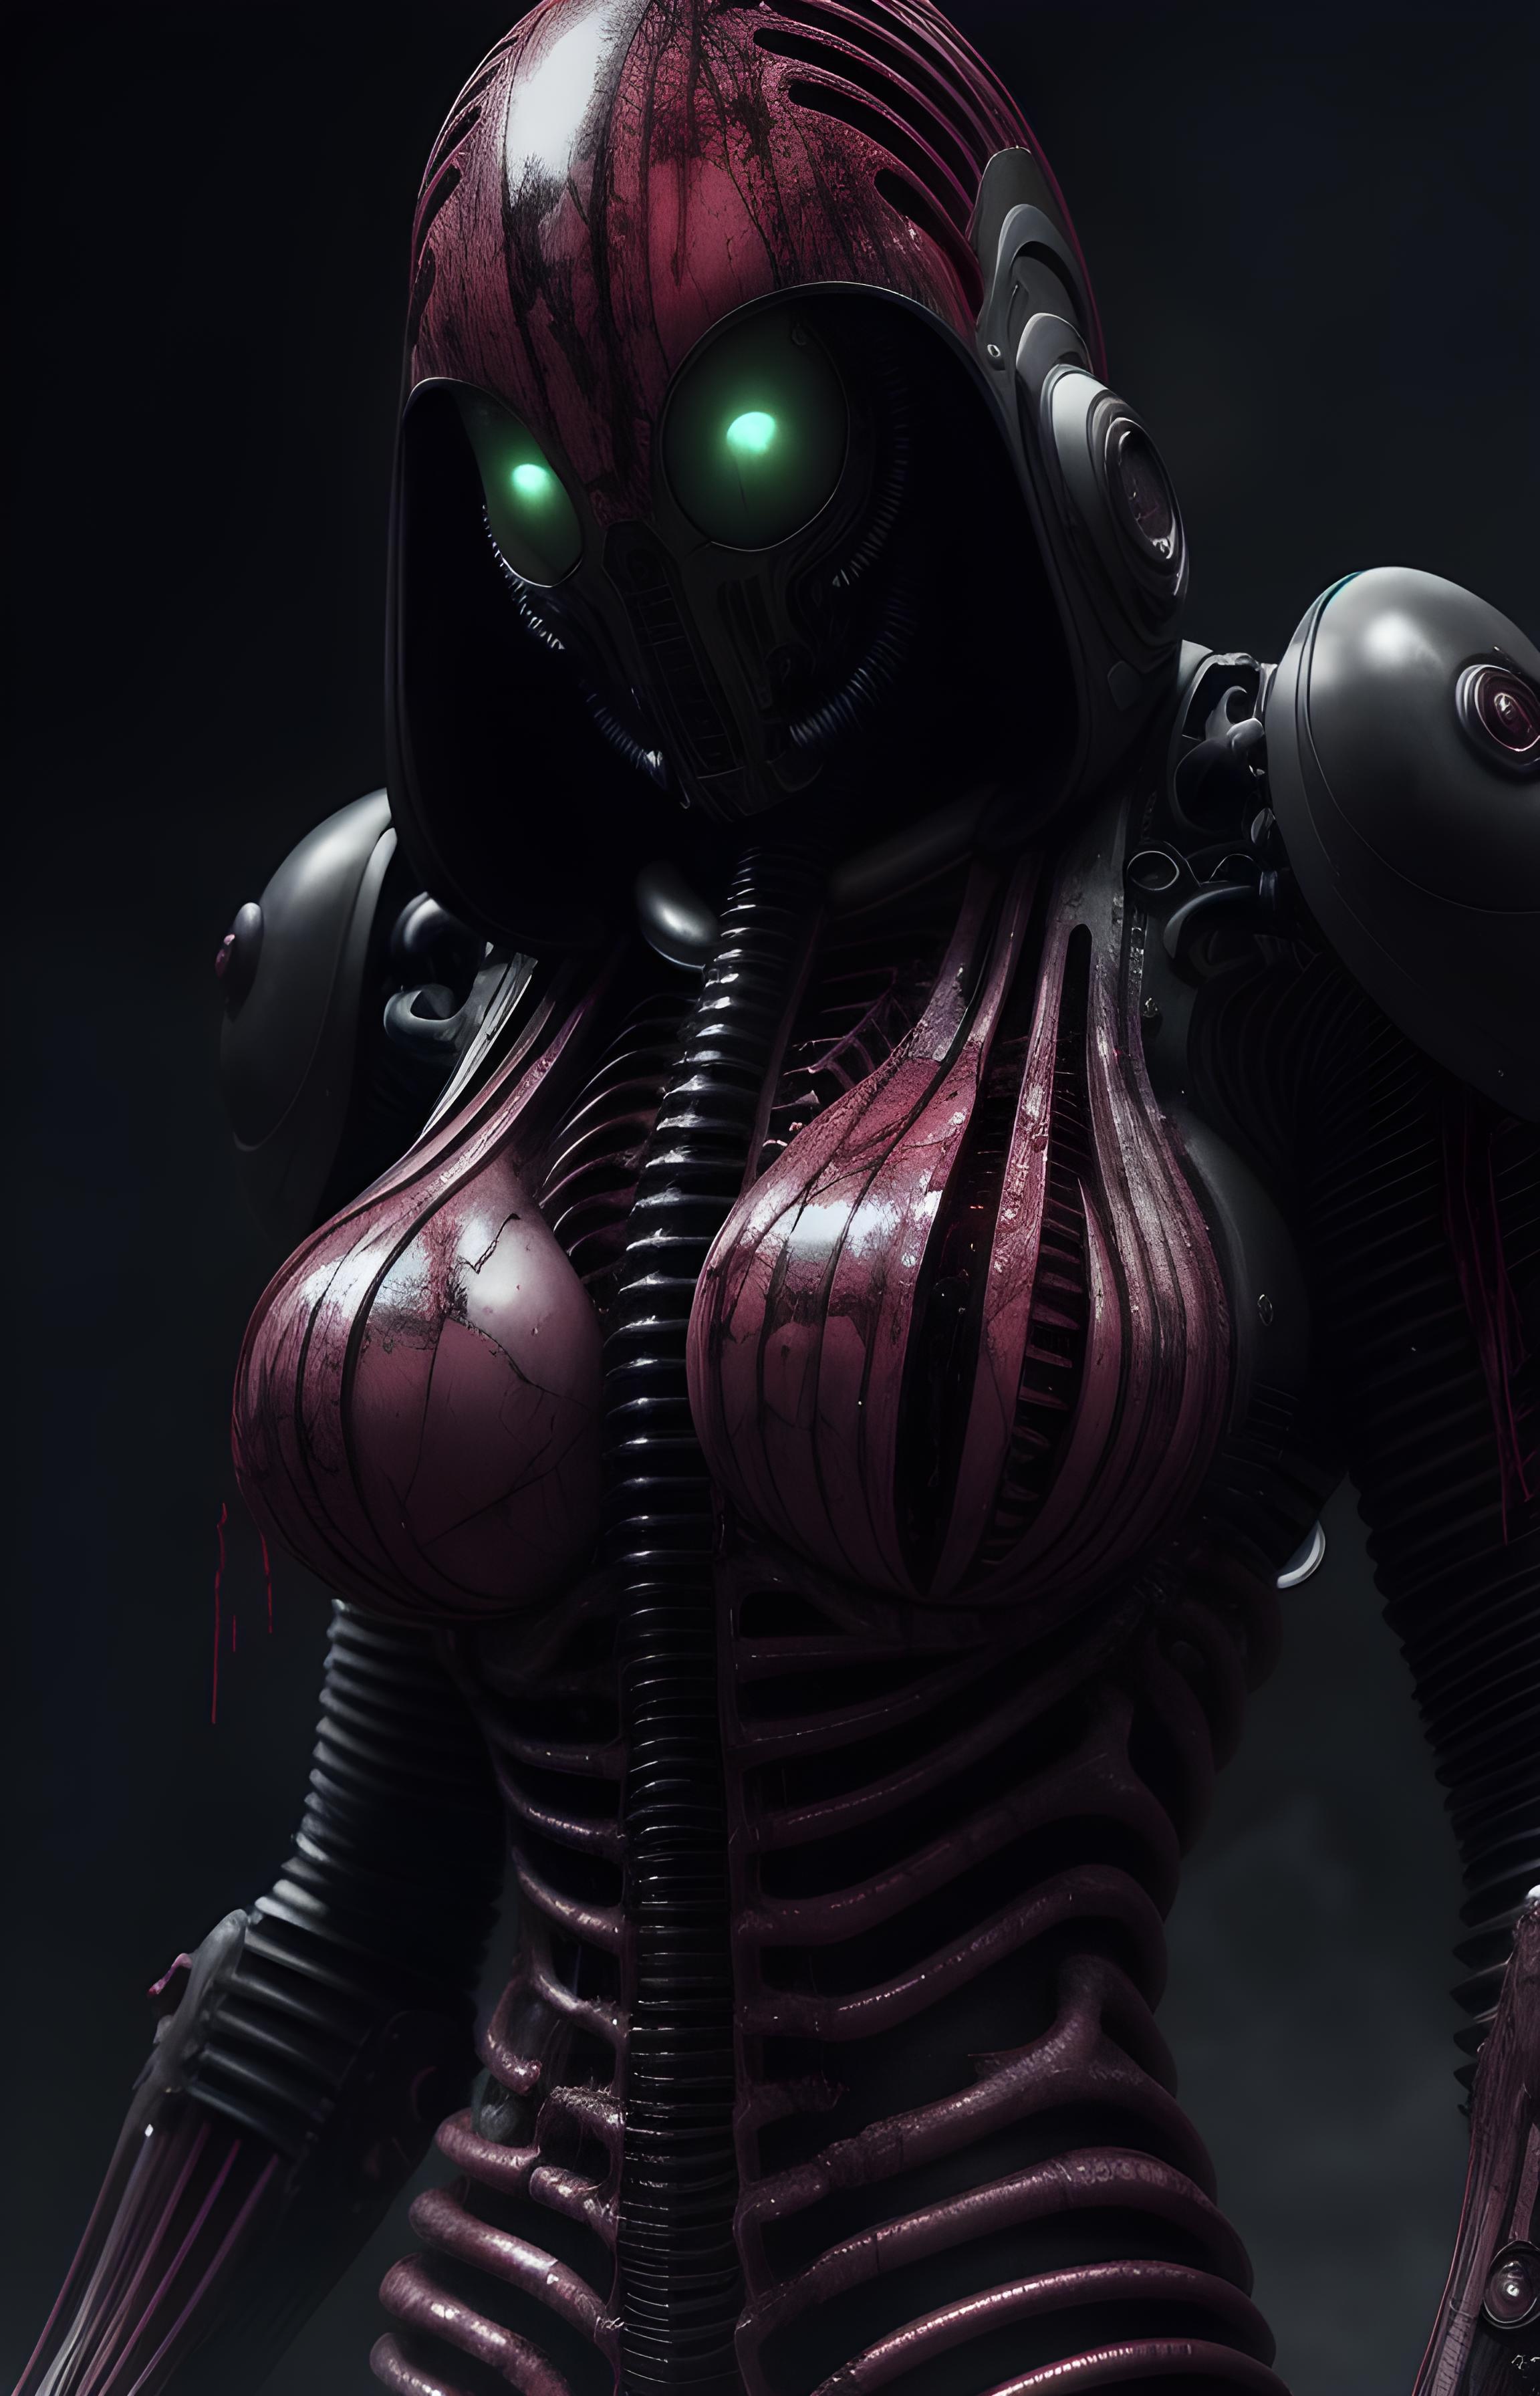 A robotic character with a pink and black outfit, featuring a green mask, a hose, and a hood.